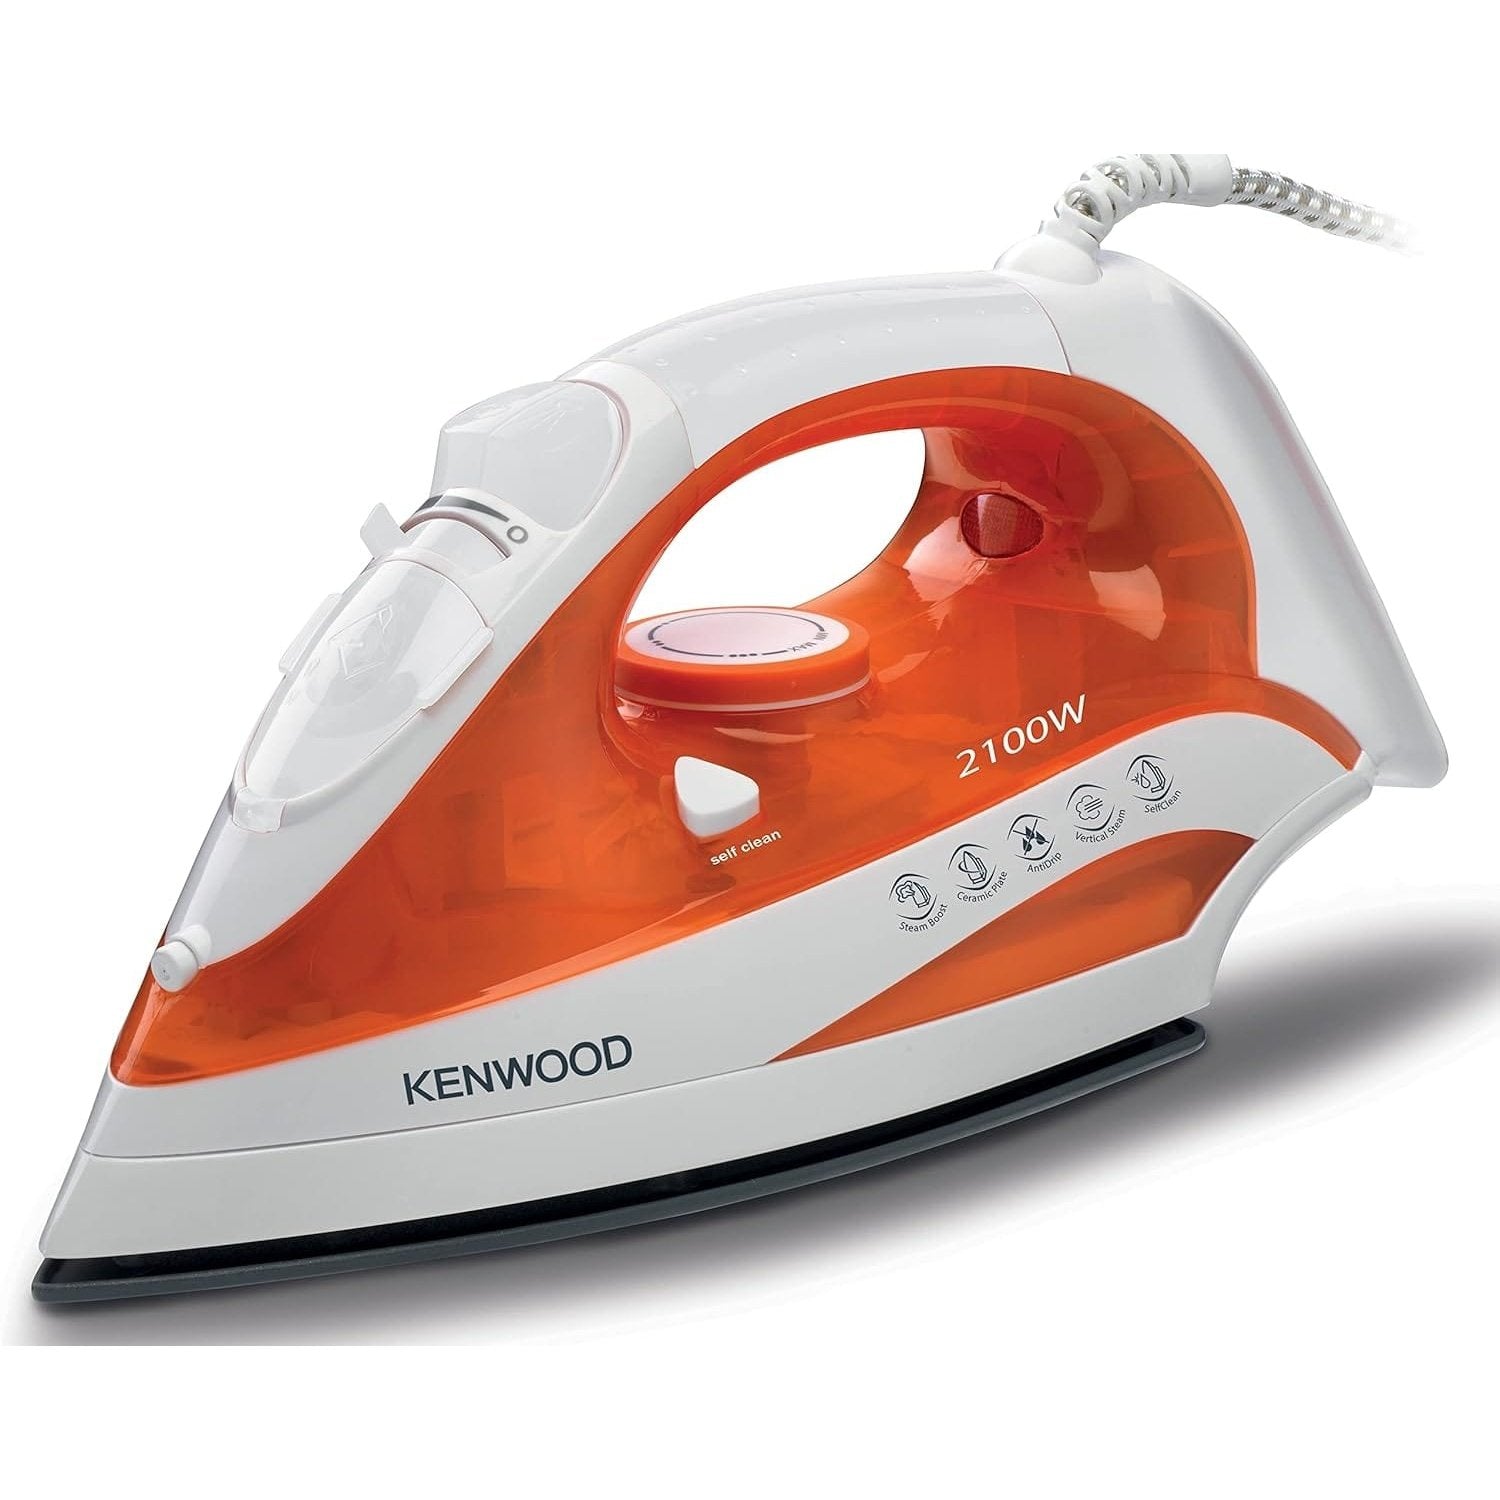 Kenwood Steam Iron 2600W - STP70 | Supply Master Accra, Ghana Electric Iron Buy Tools hardware Building materials